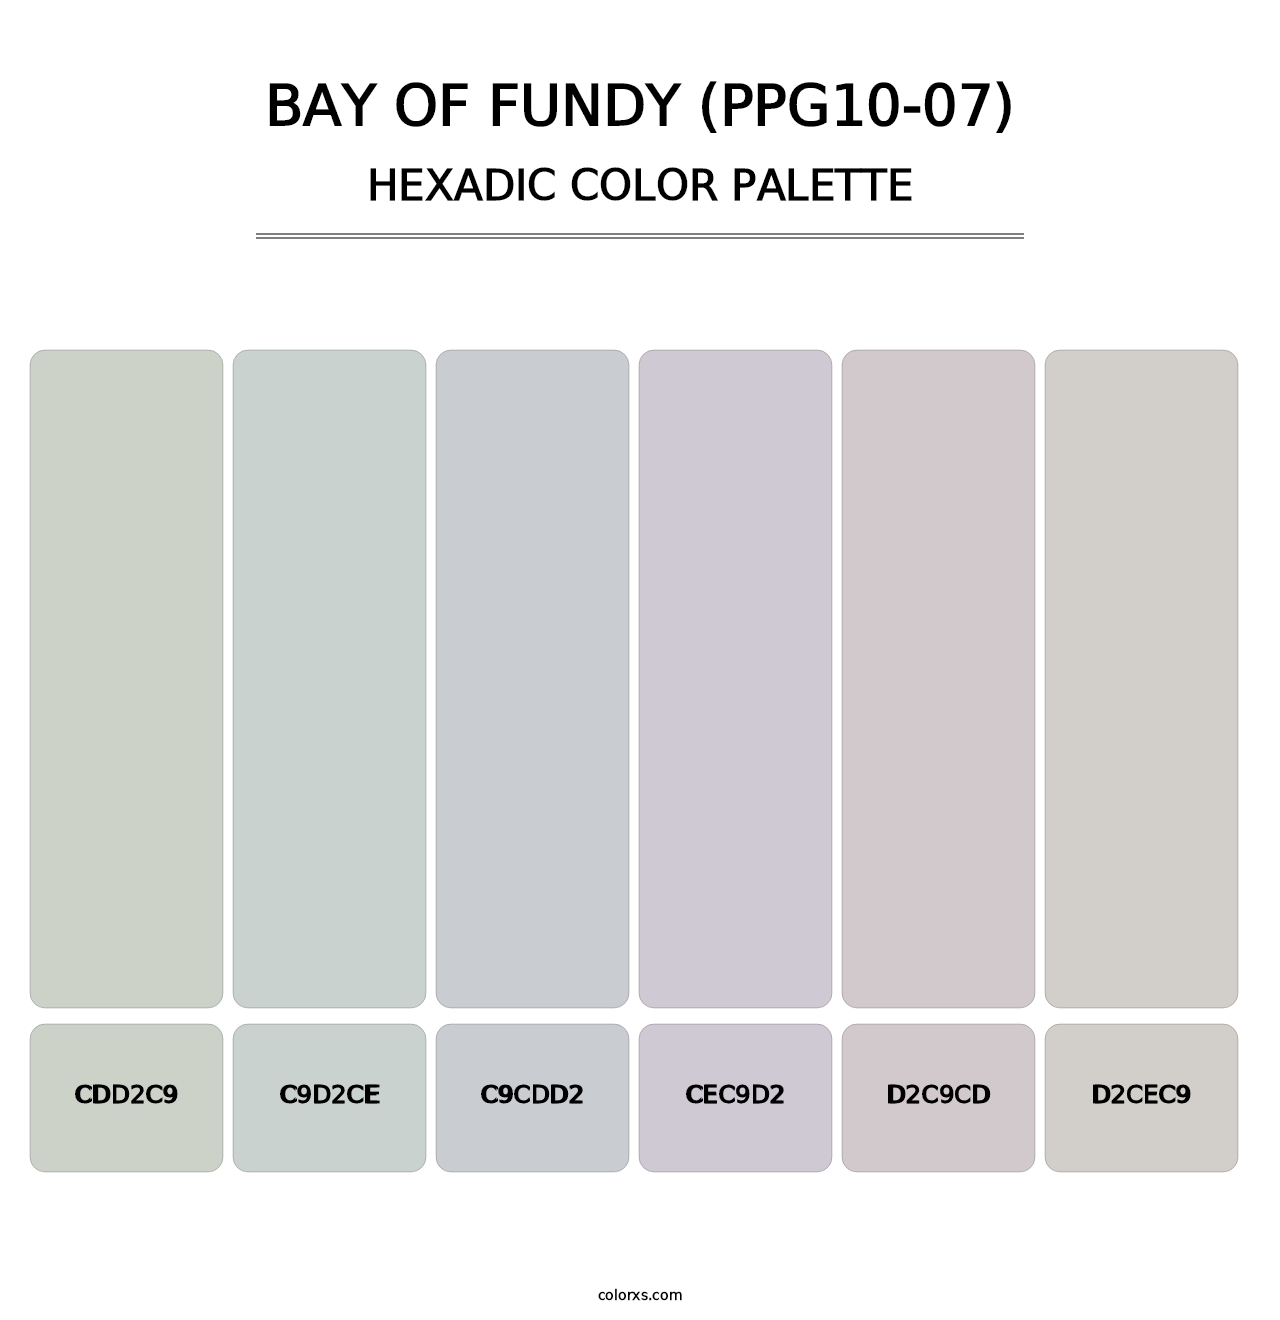 Bay Of Fundy (PPG10-07) - Hexadic Color Palette